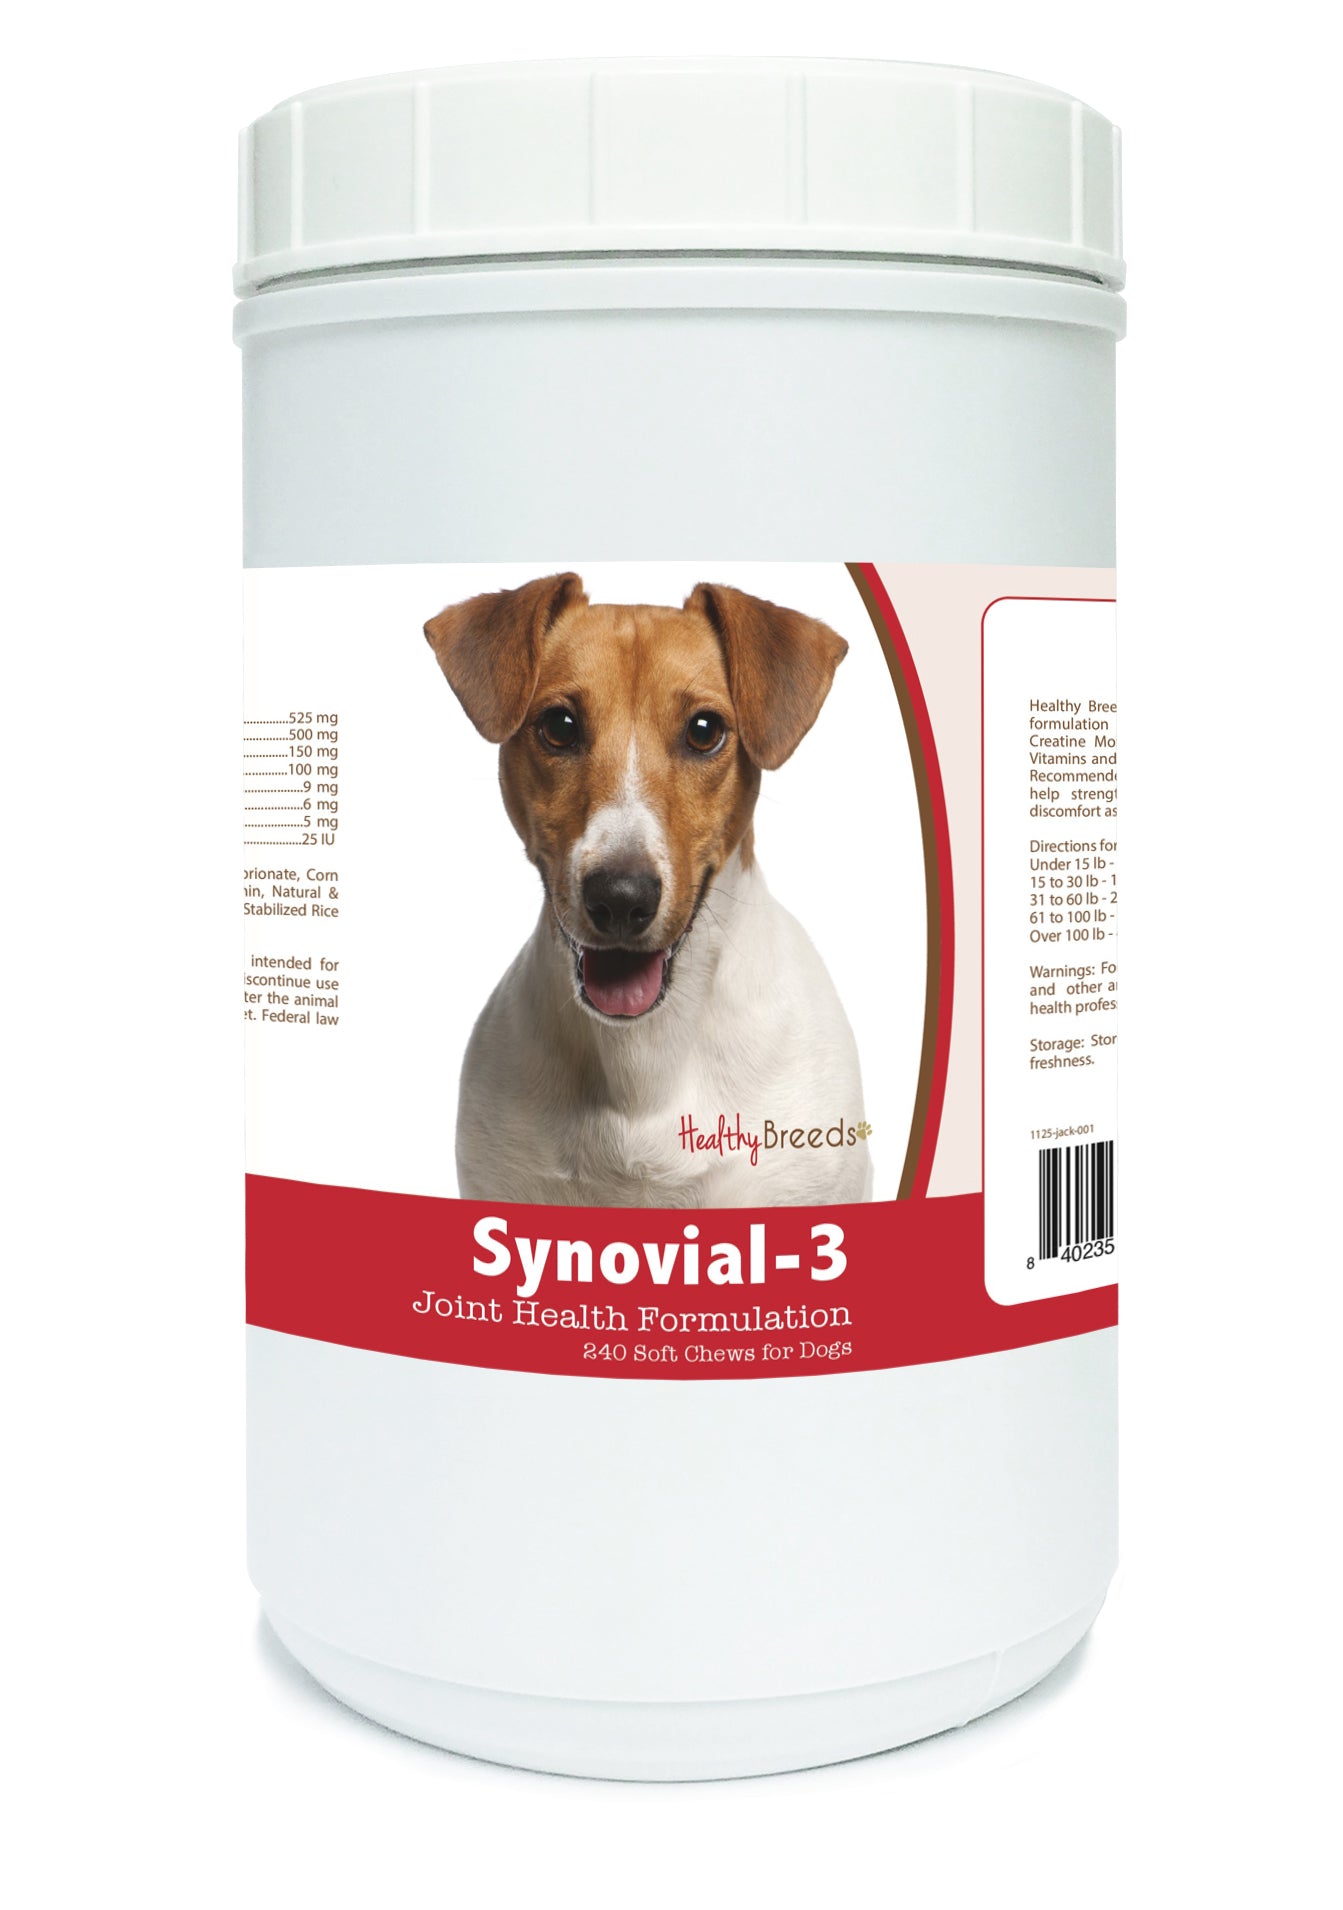 Jack Russell Terrier Synovial-3 Joint Health Formulation Soft Chews 240 Count